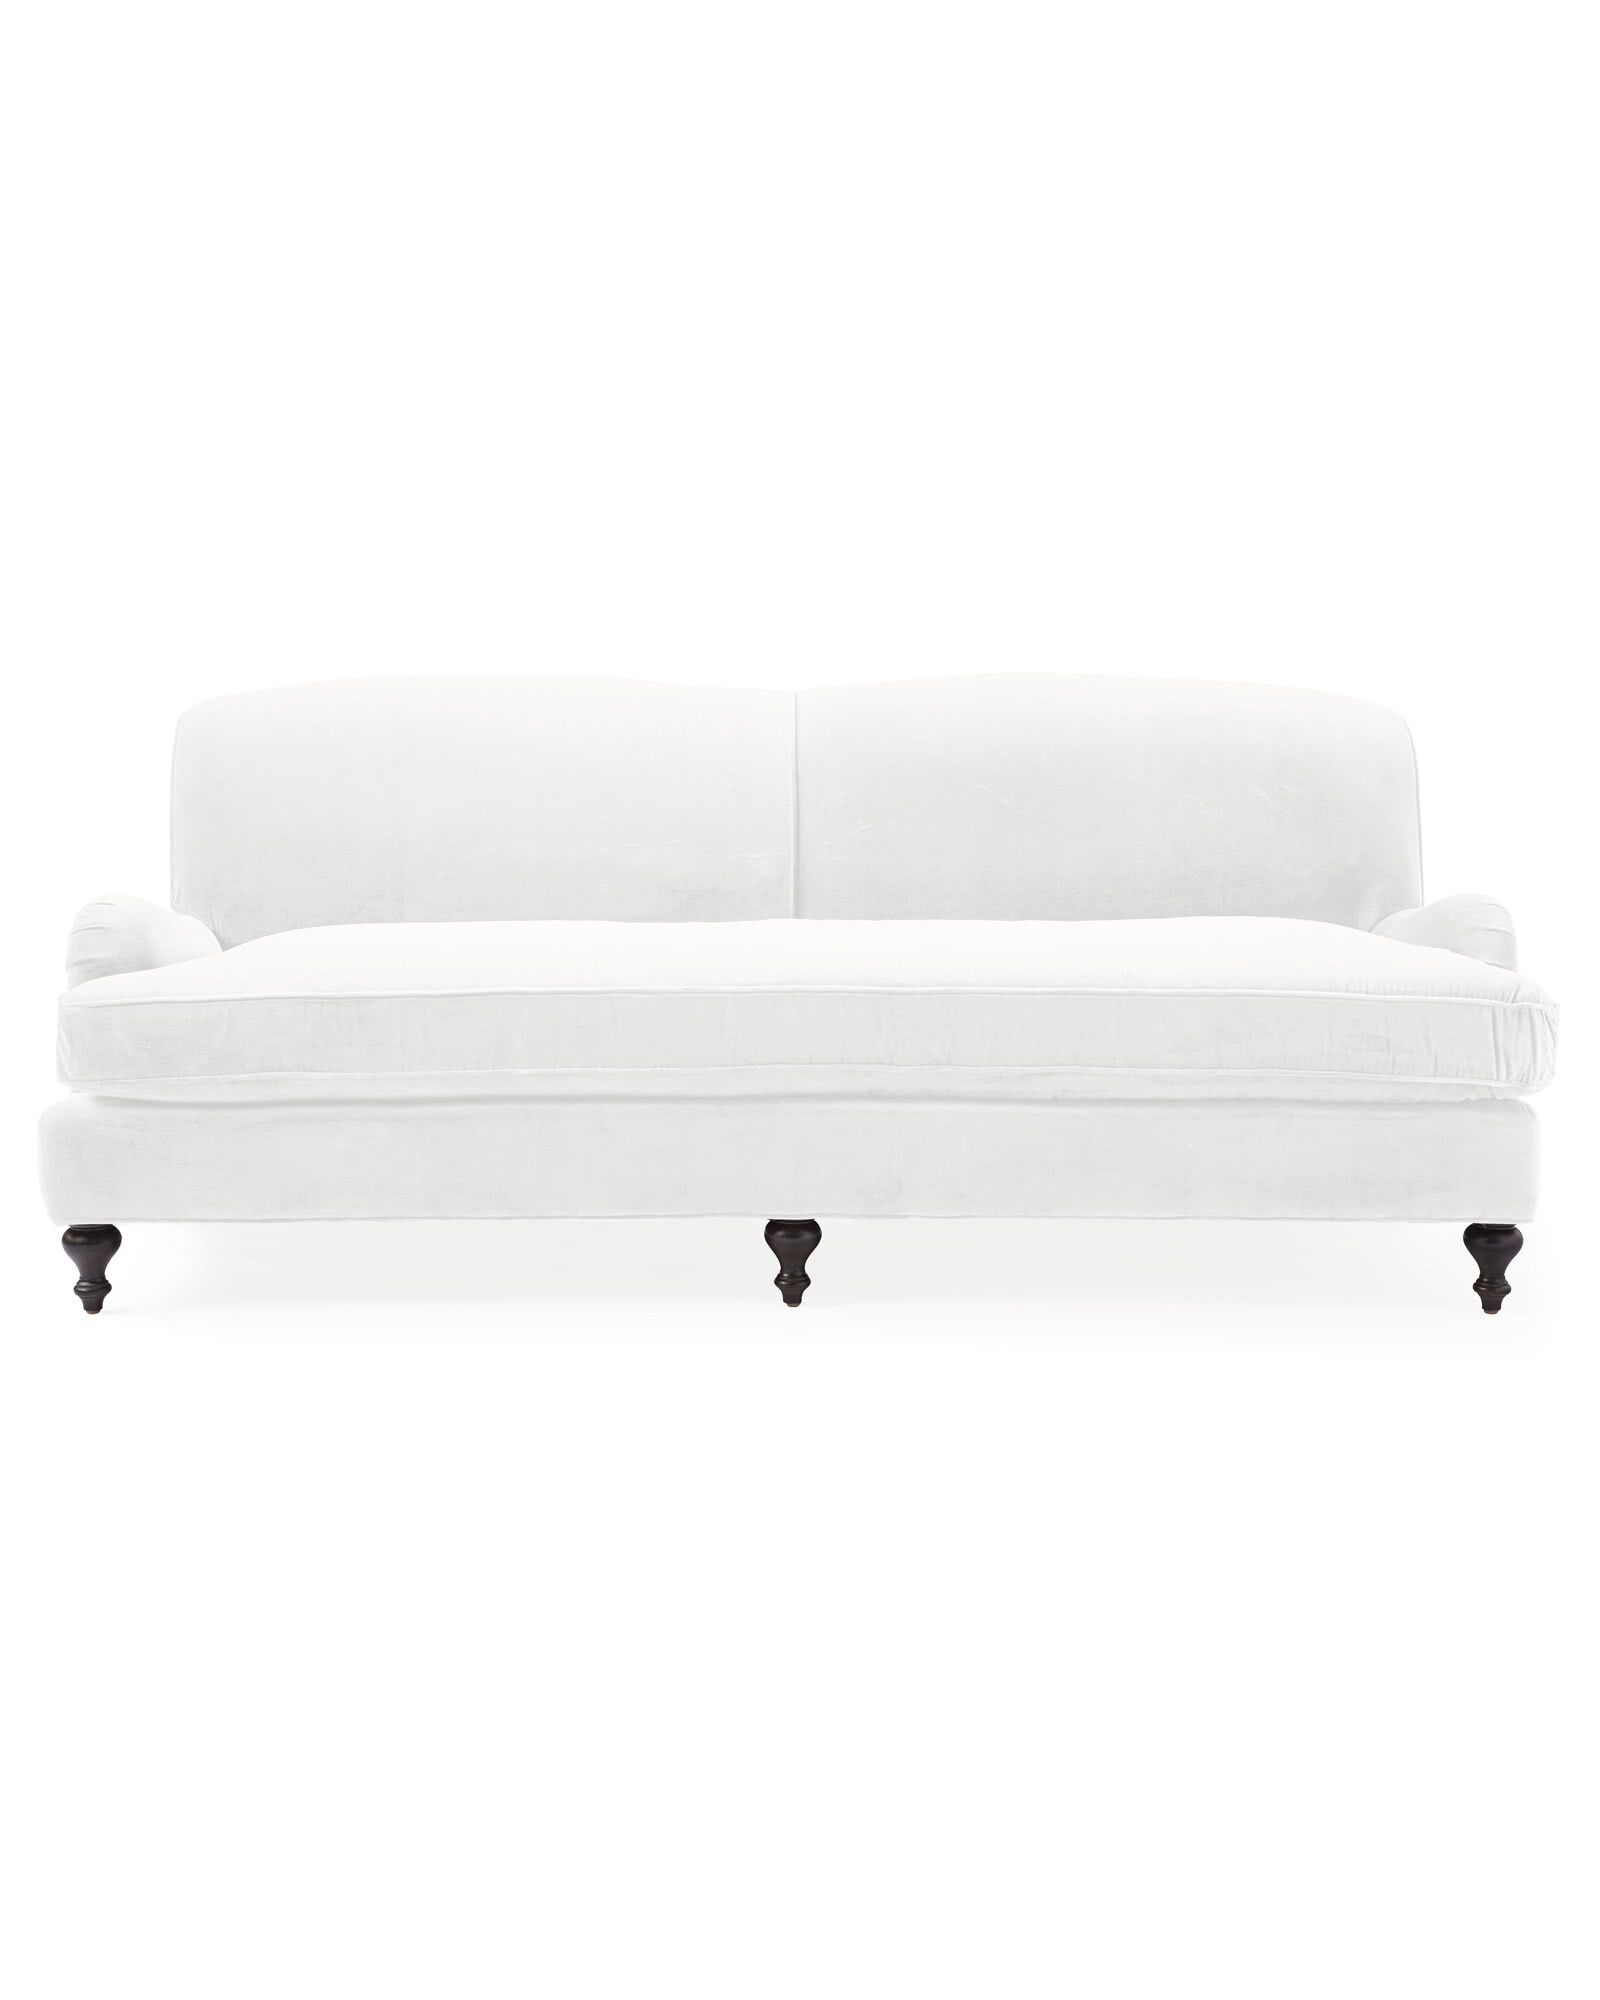 Miramar Sofa with Bench Seat | Serena and Lily